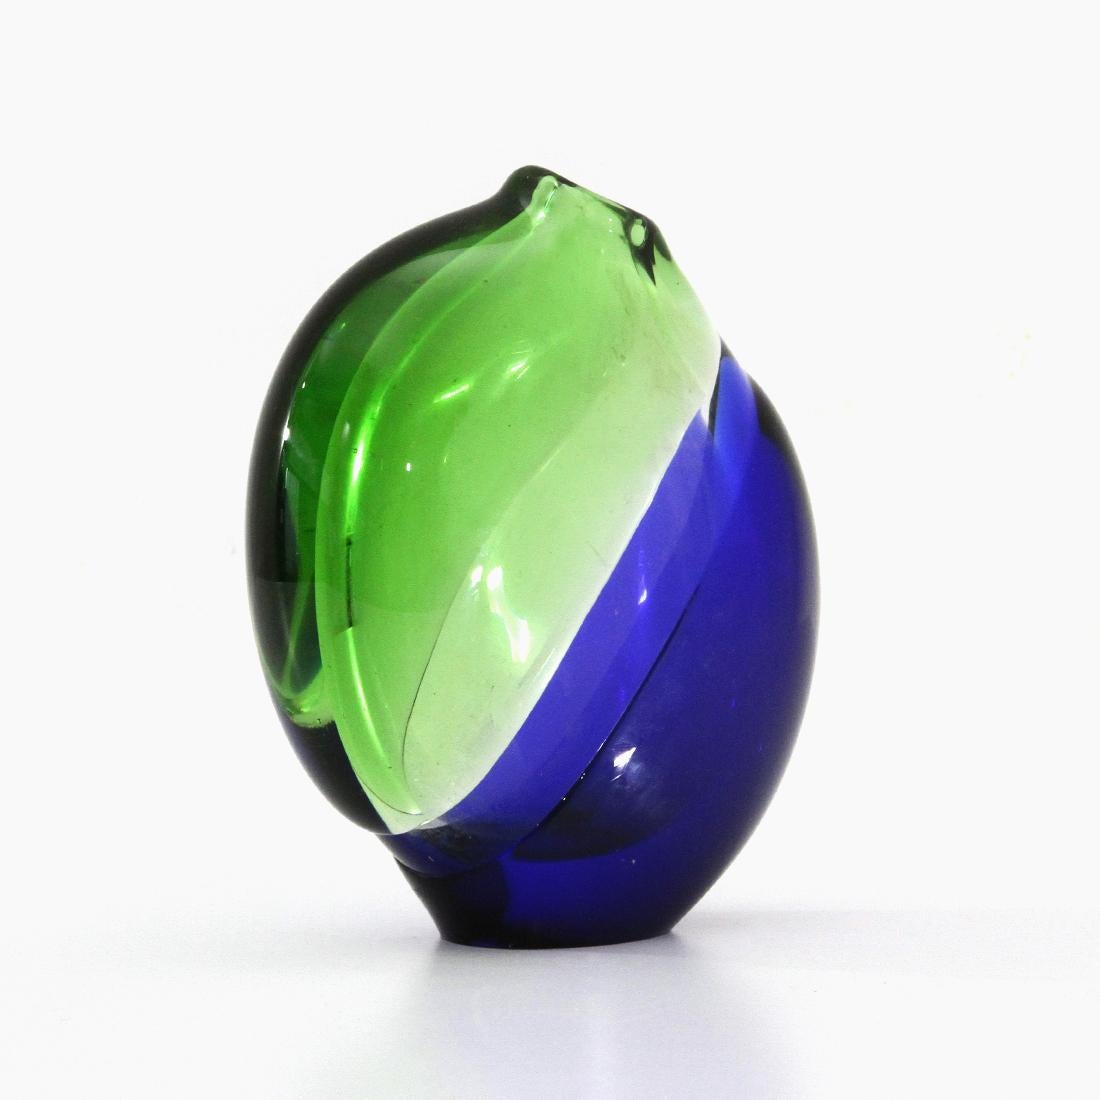 Italian-made vase produced in the 1960s.
Hand blown Murano glass vase in the colors of green, transparent and blue.
Good general conditions.

Dimensions: Length 15 cm, depth 7 cm, height 18 cm.